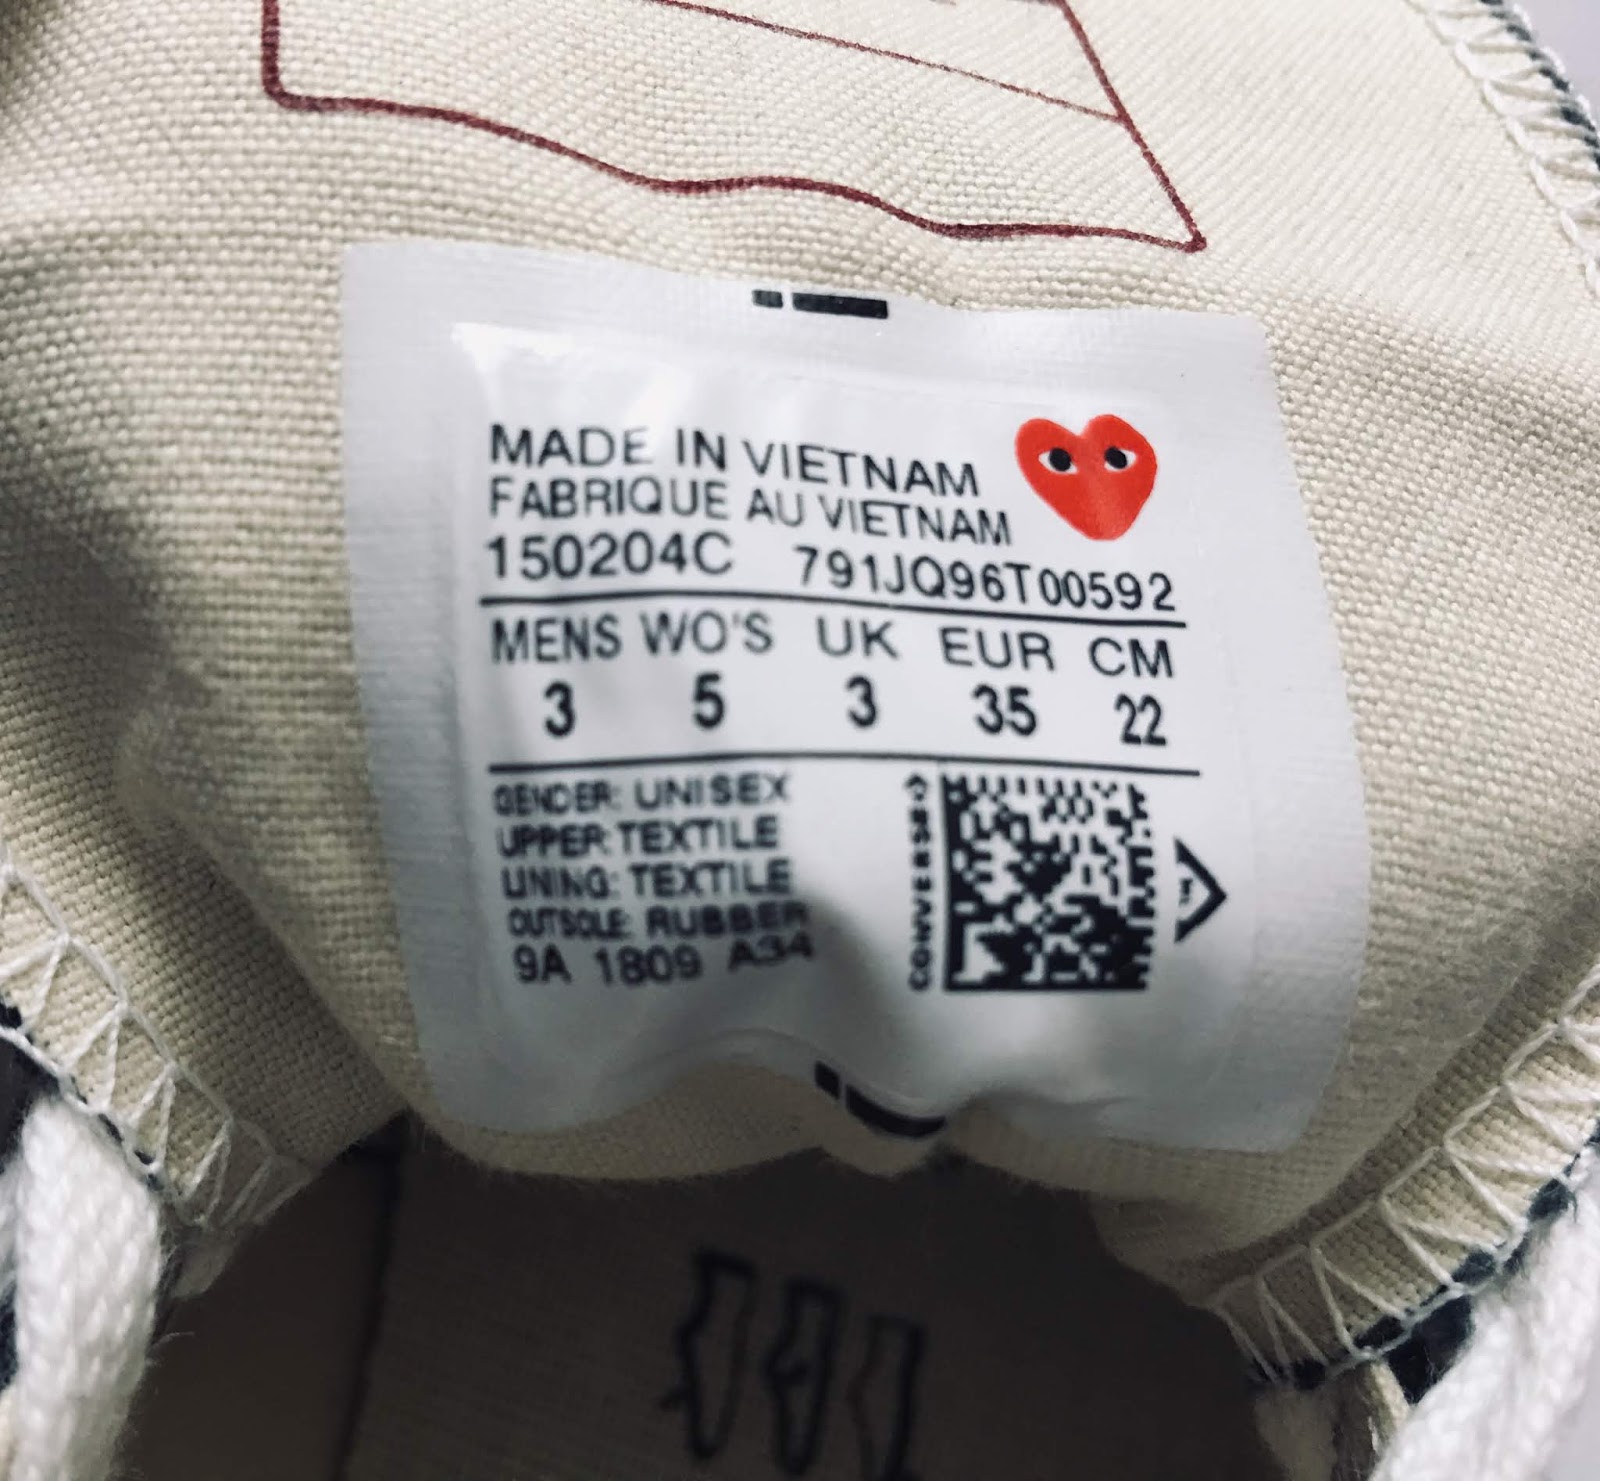 converse cdg size guide